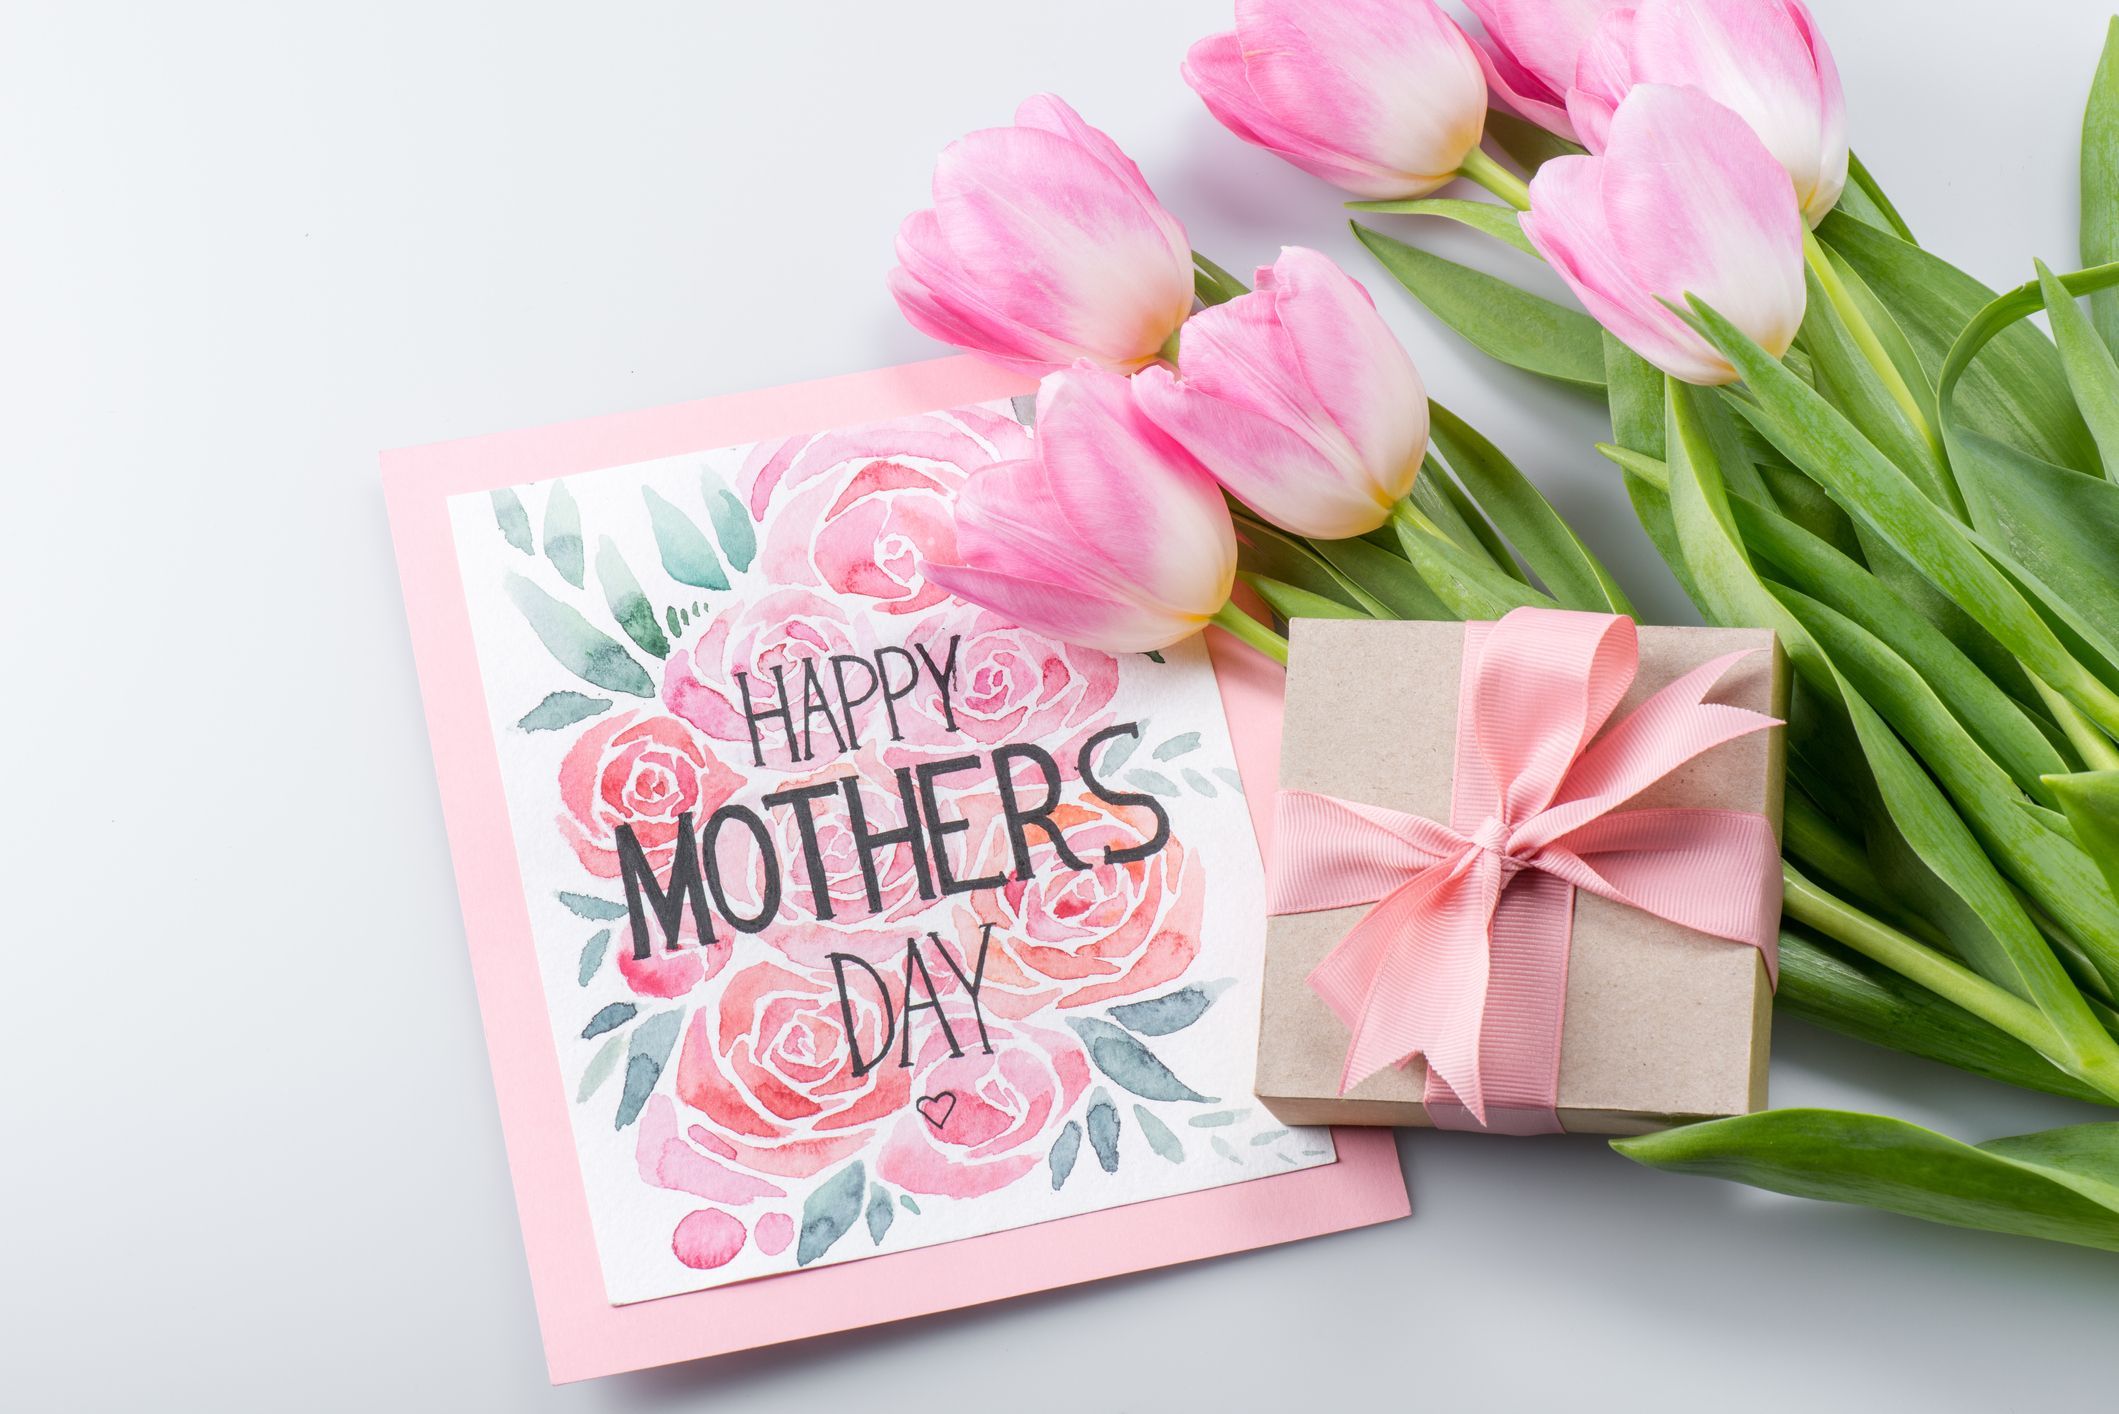 50 Mother's Day Card Messages and Wishes What to Write in a Mother's